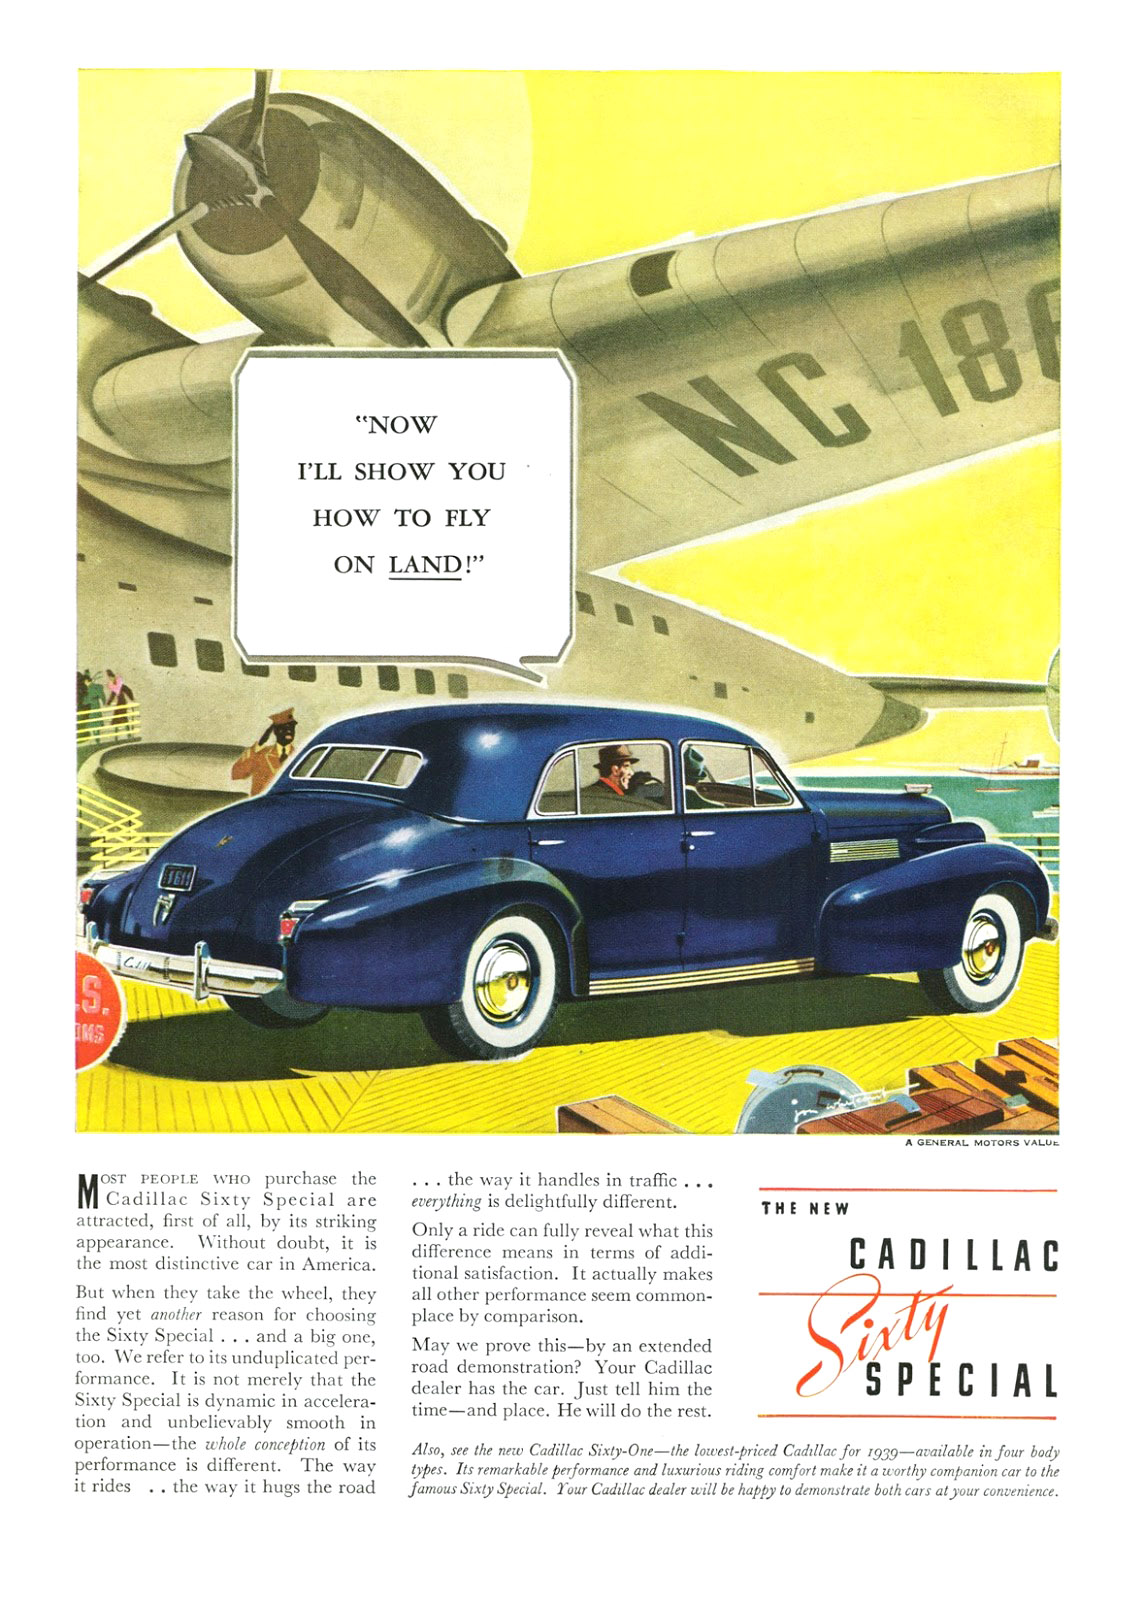 Cadillac Sixty Special Ad (November–December, 1938) - Illustrated by Jon Whitcomb